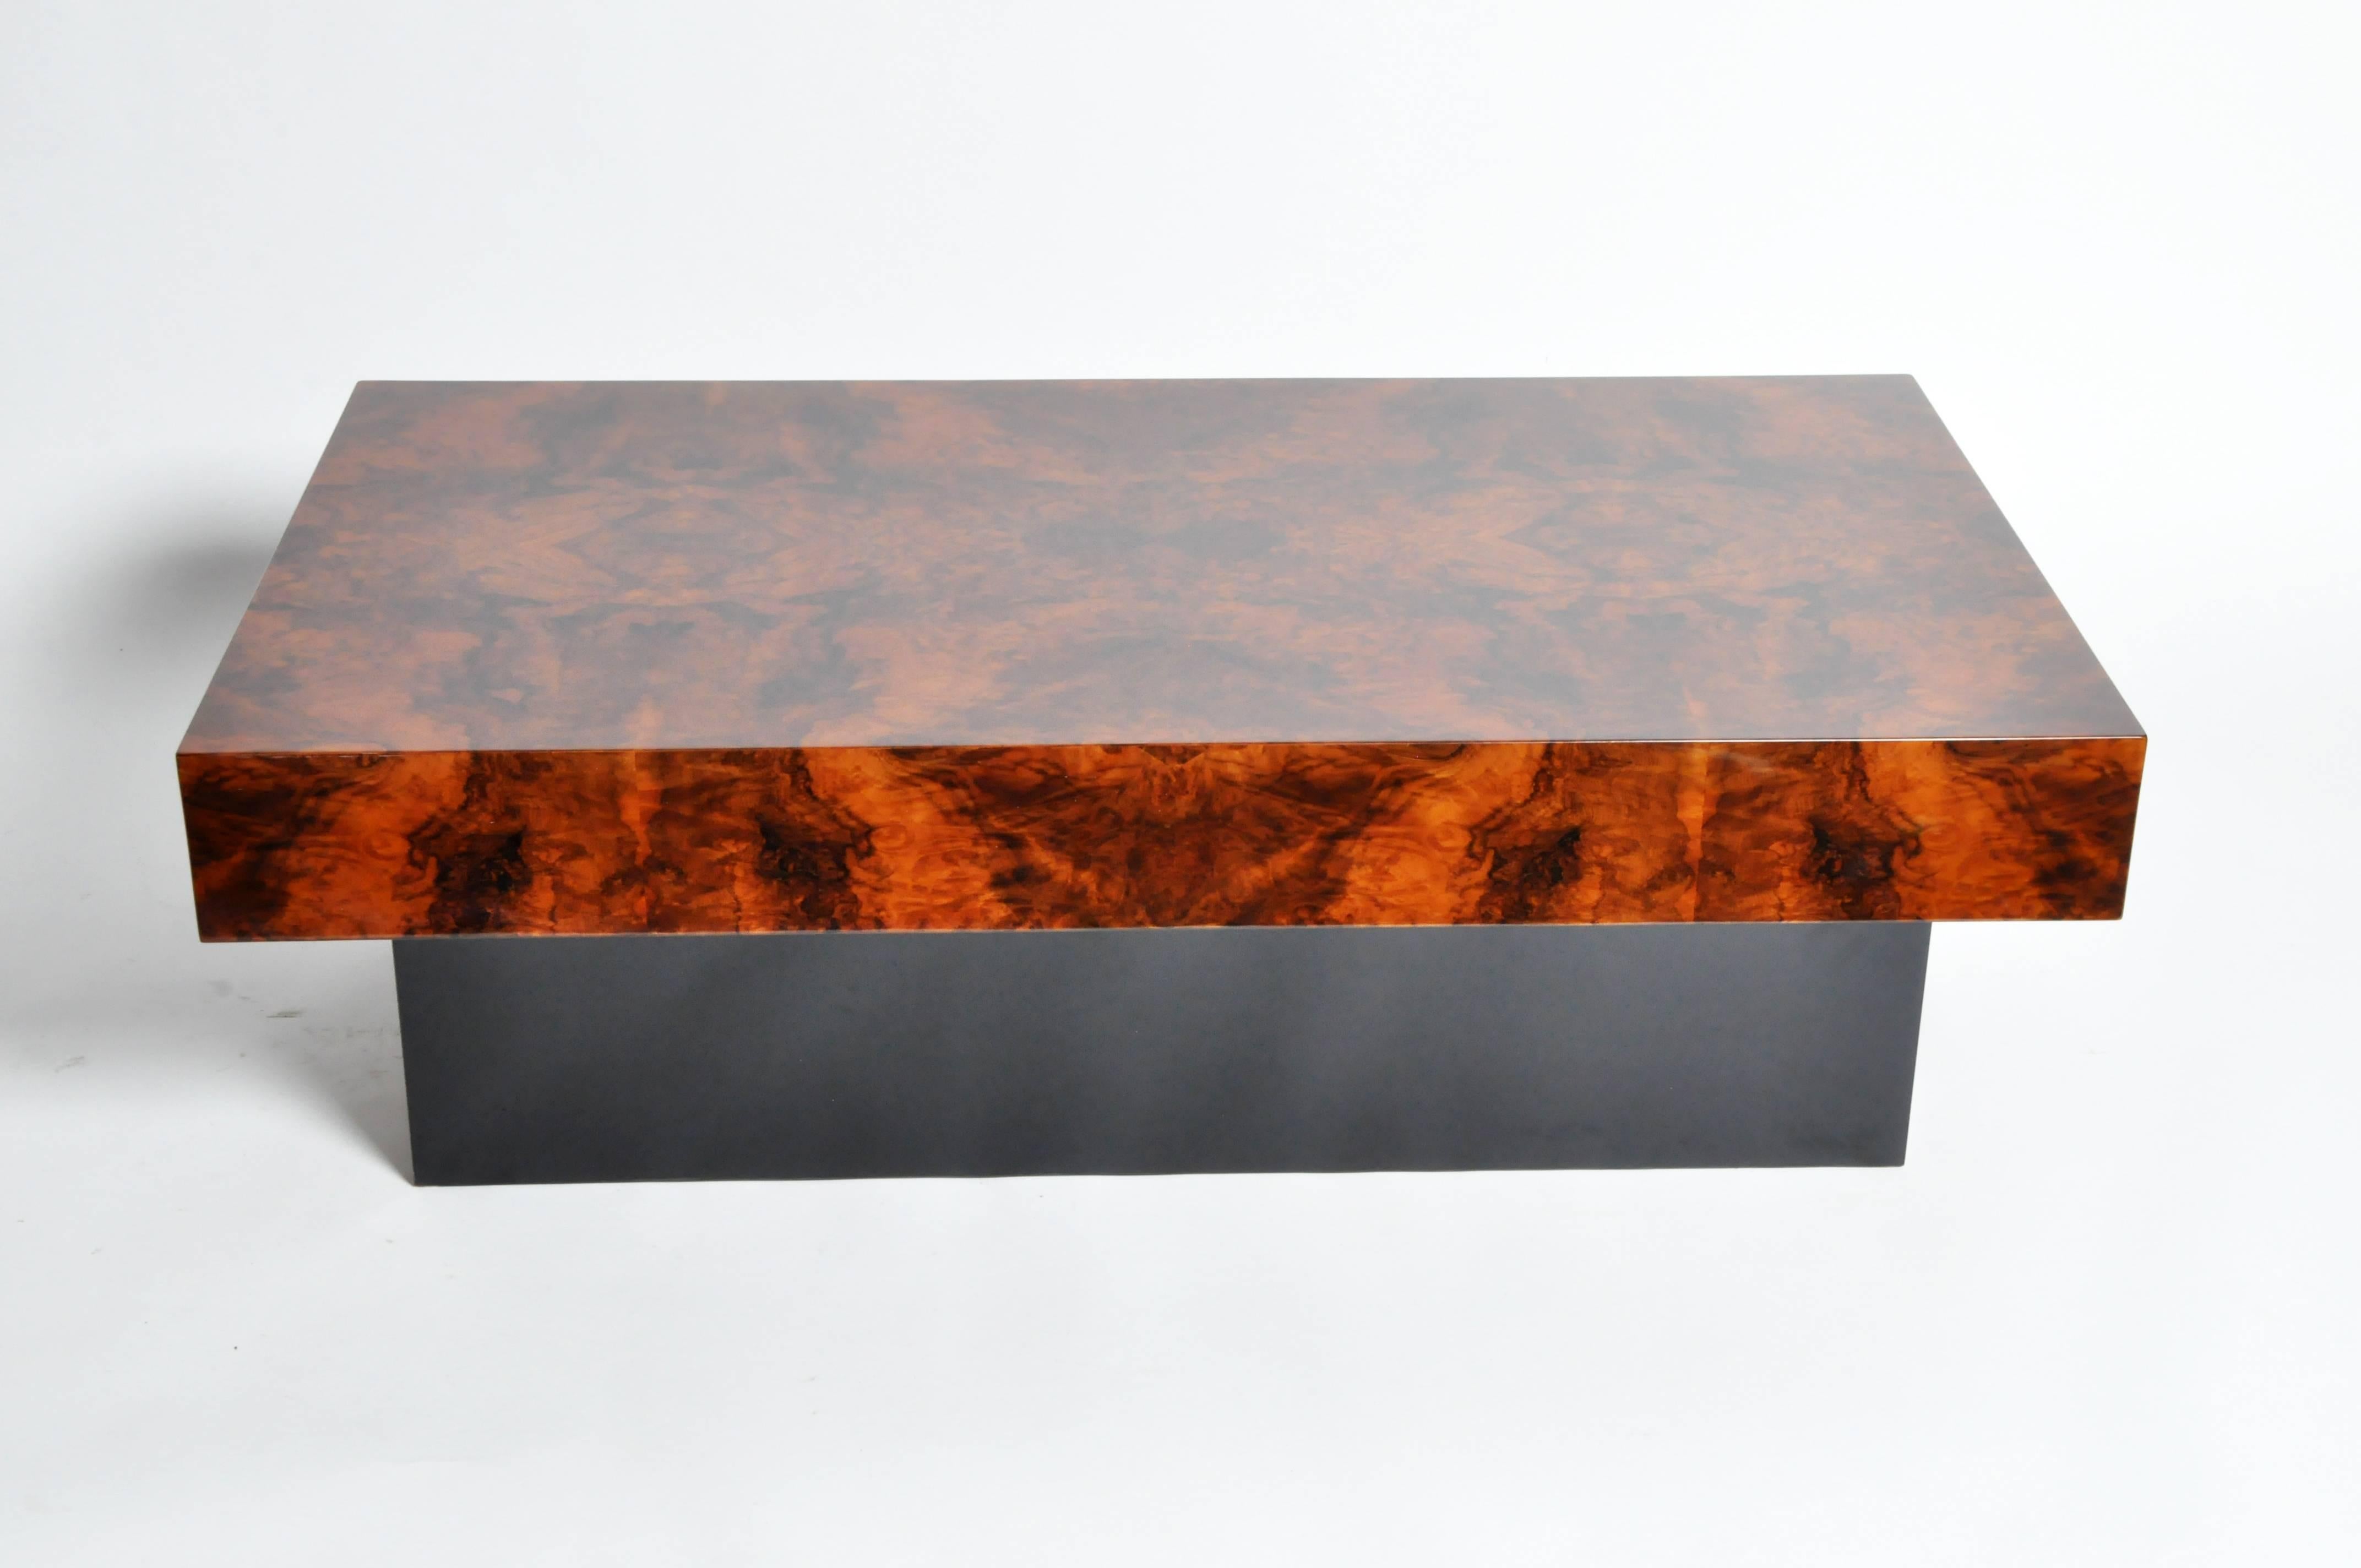 Bold, monumentality of form and high gloss finish make this piece of furniture a masterpiece in the 